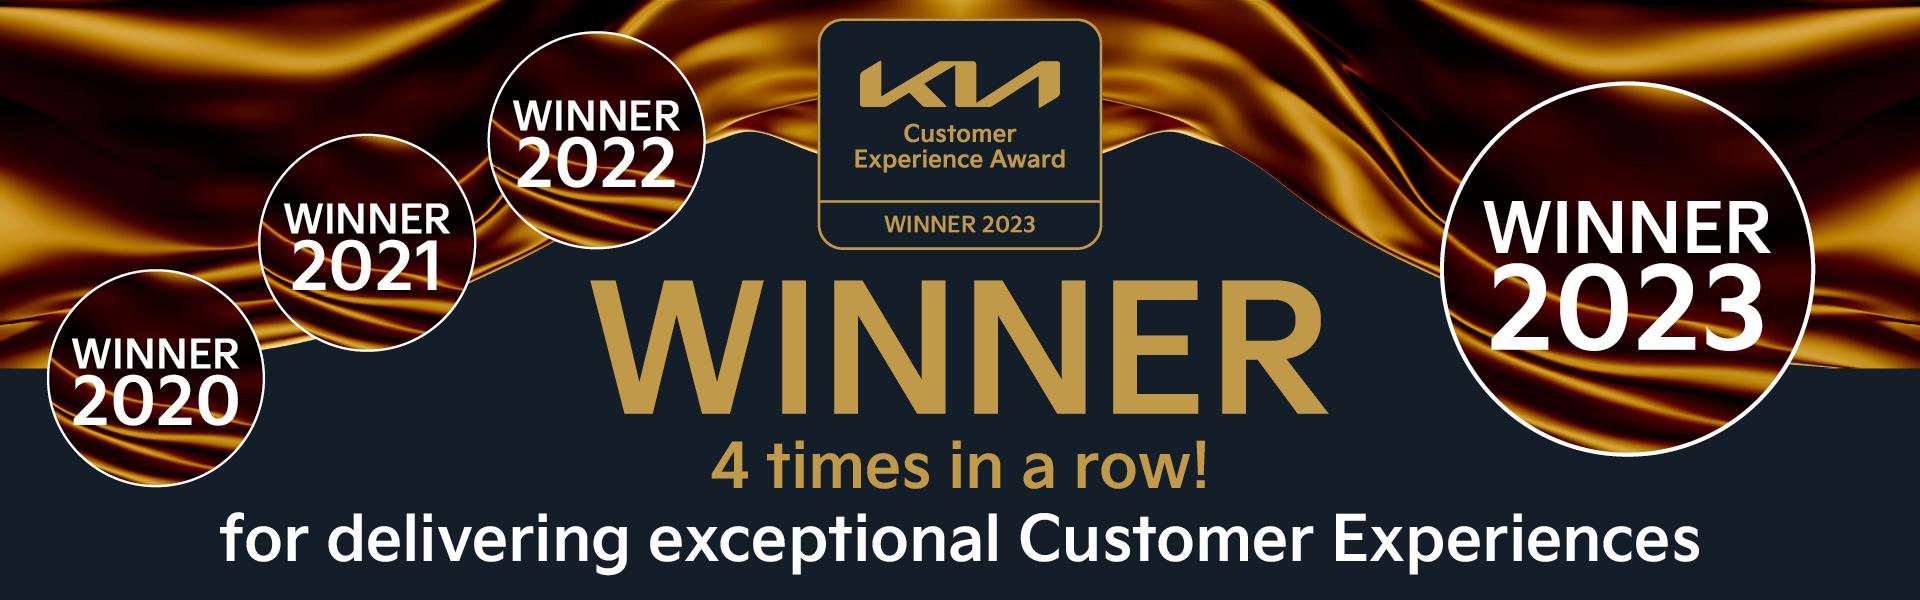 4 times in a row winner of Kia Customer Experience Award for delivering exceptional Customer Experience